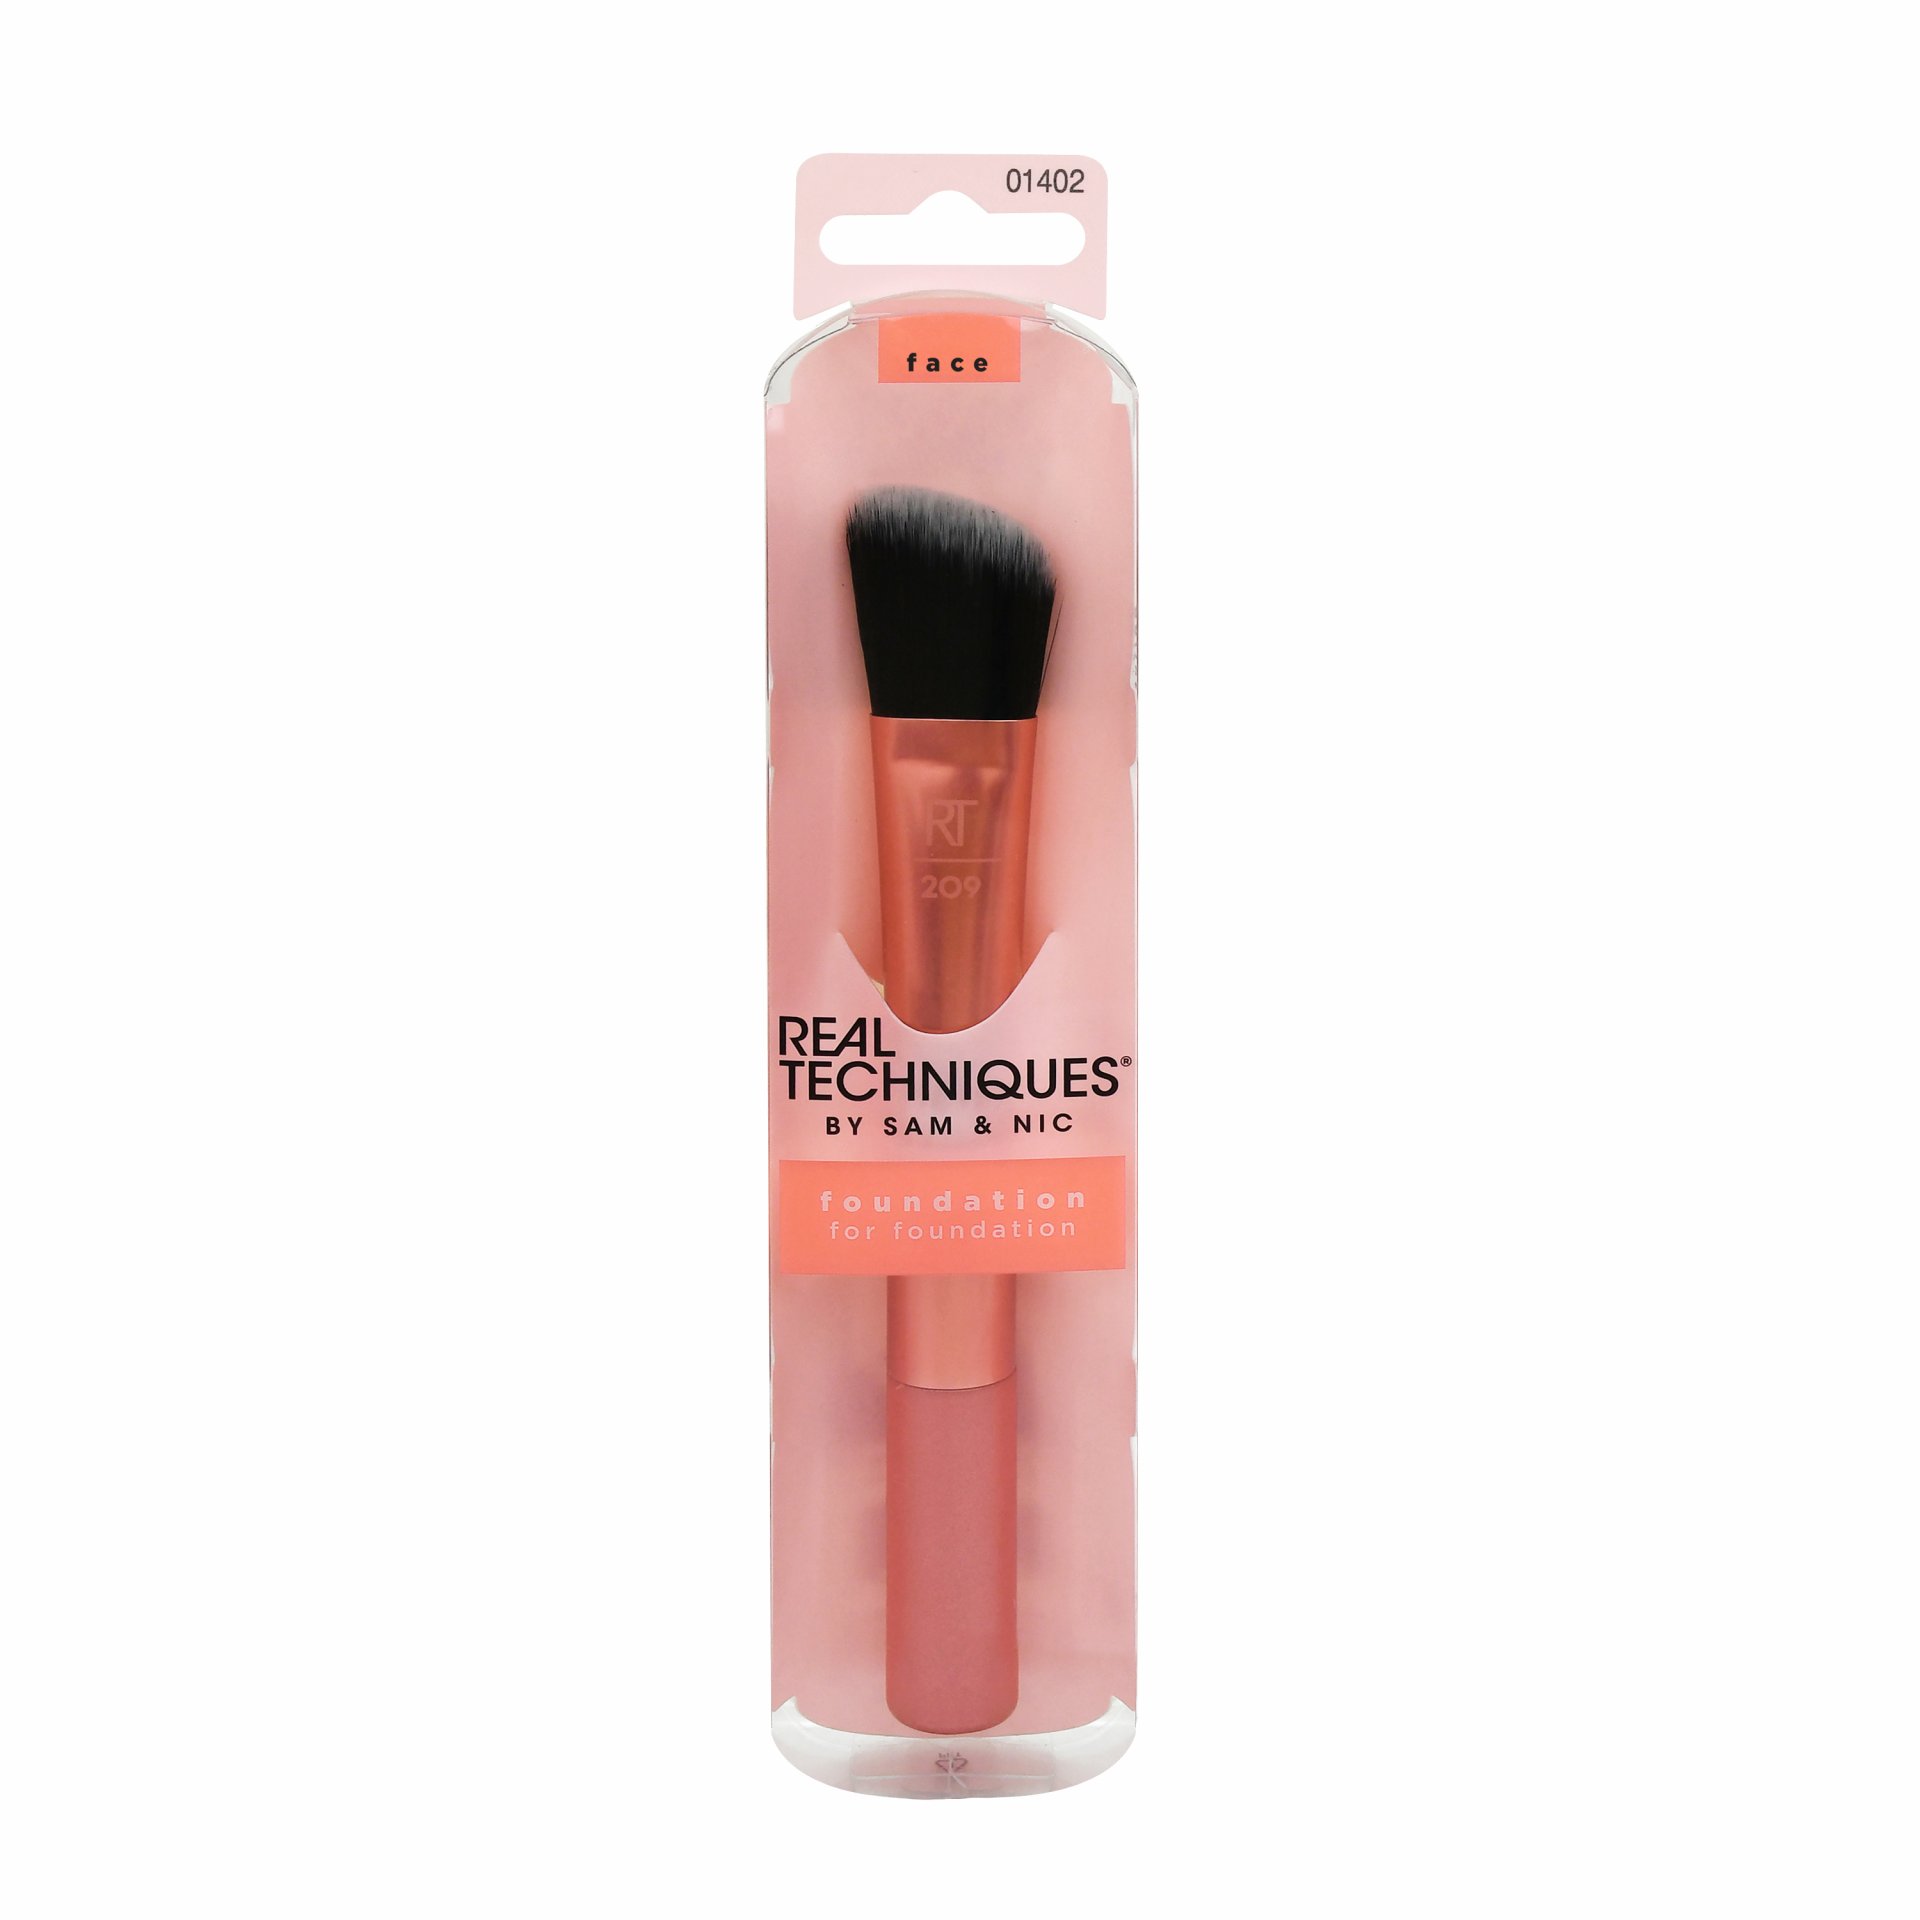 REAL TECHNIQUES FOUNDATION BRUSH